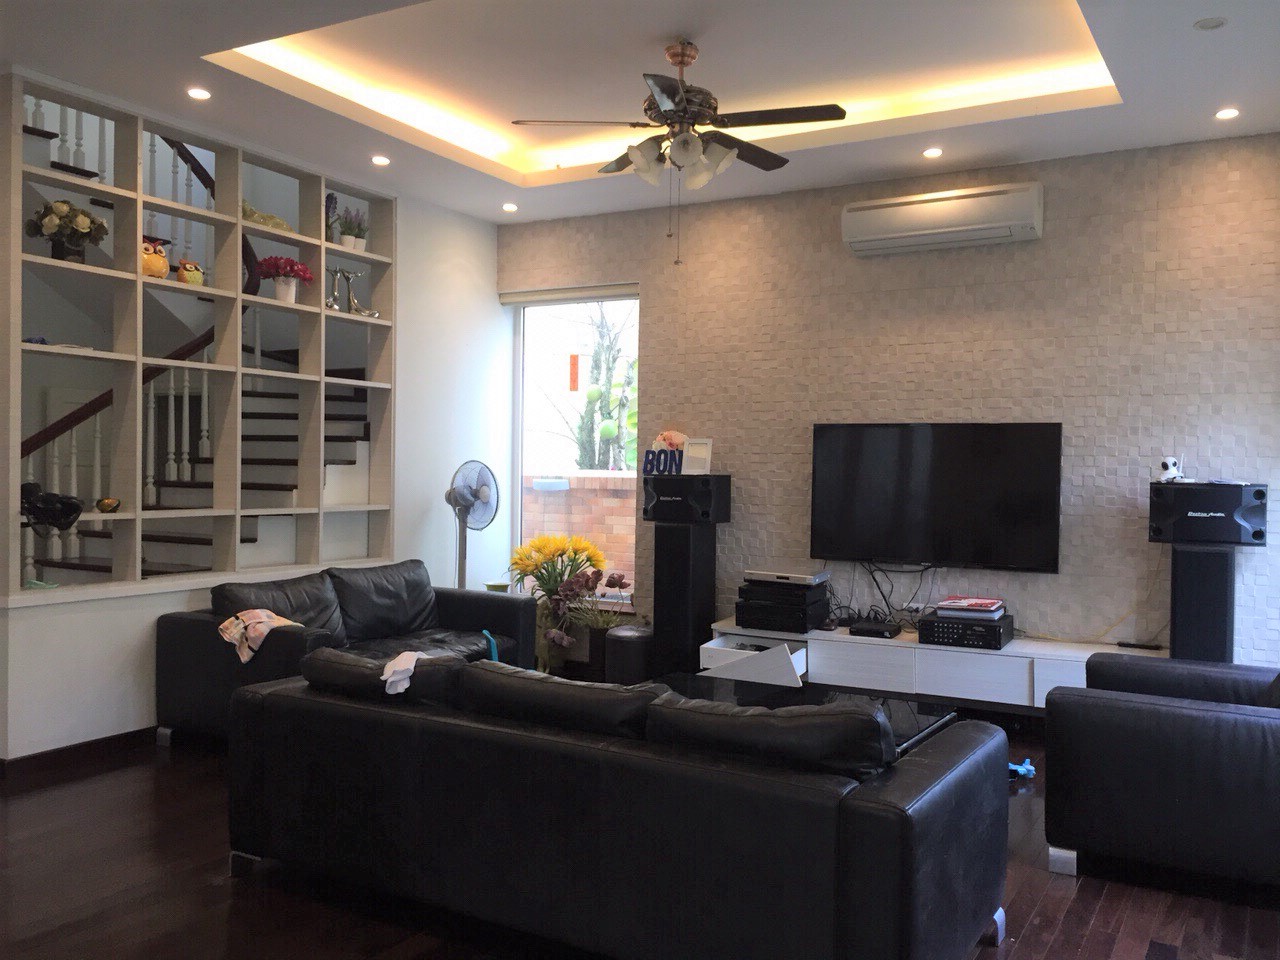 Gorgeous and well-lit 3 bedroom-villa for rent in Vinhomes Riverside!